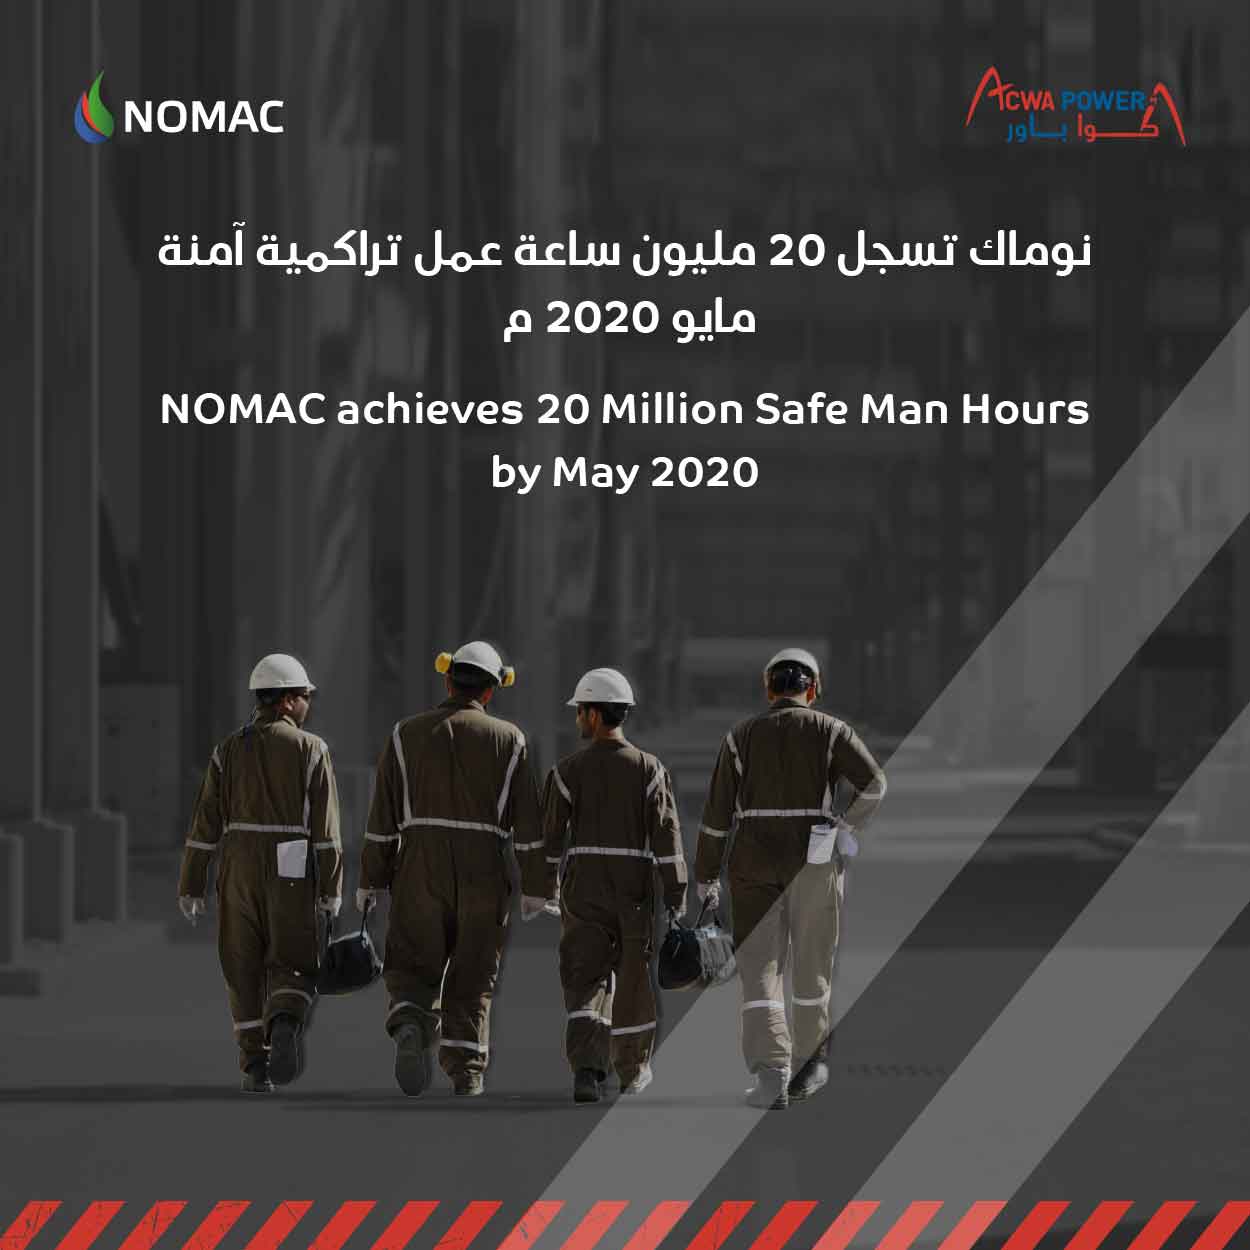 NOMAC, News Room, NOMAC achieves 20 Million Safe Man Hours by May 2020